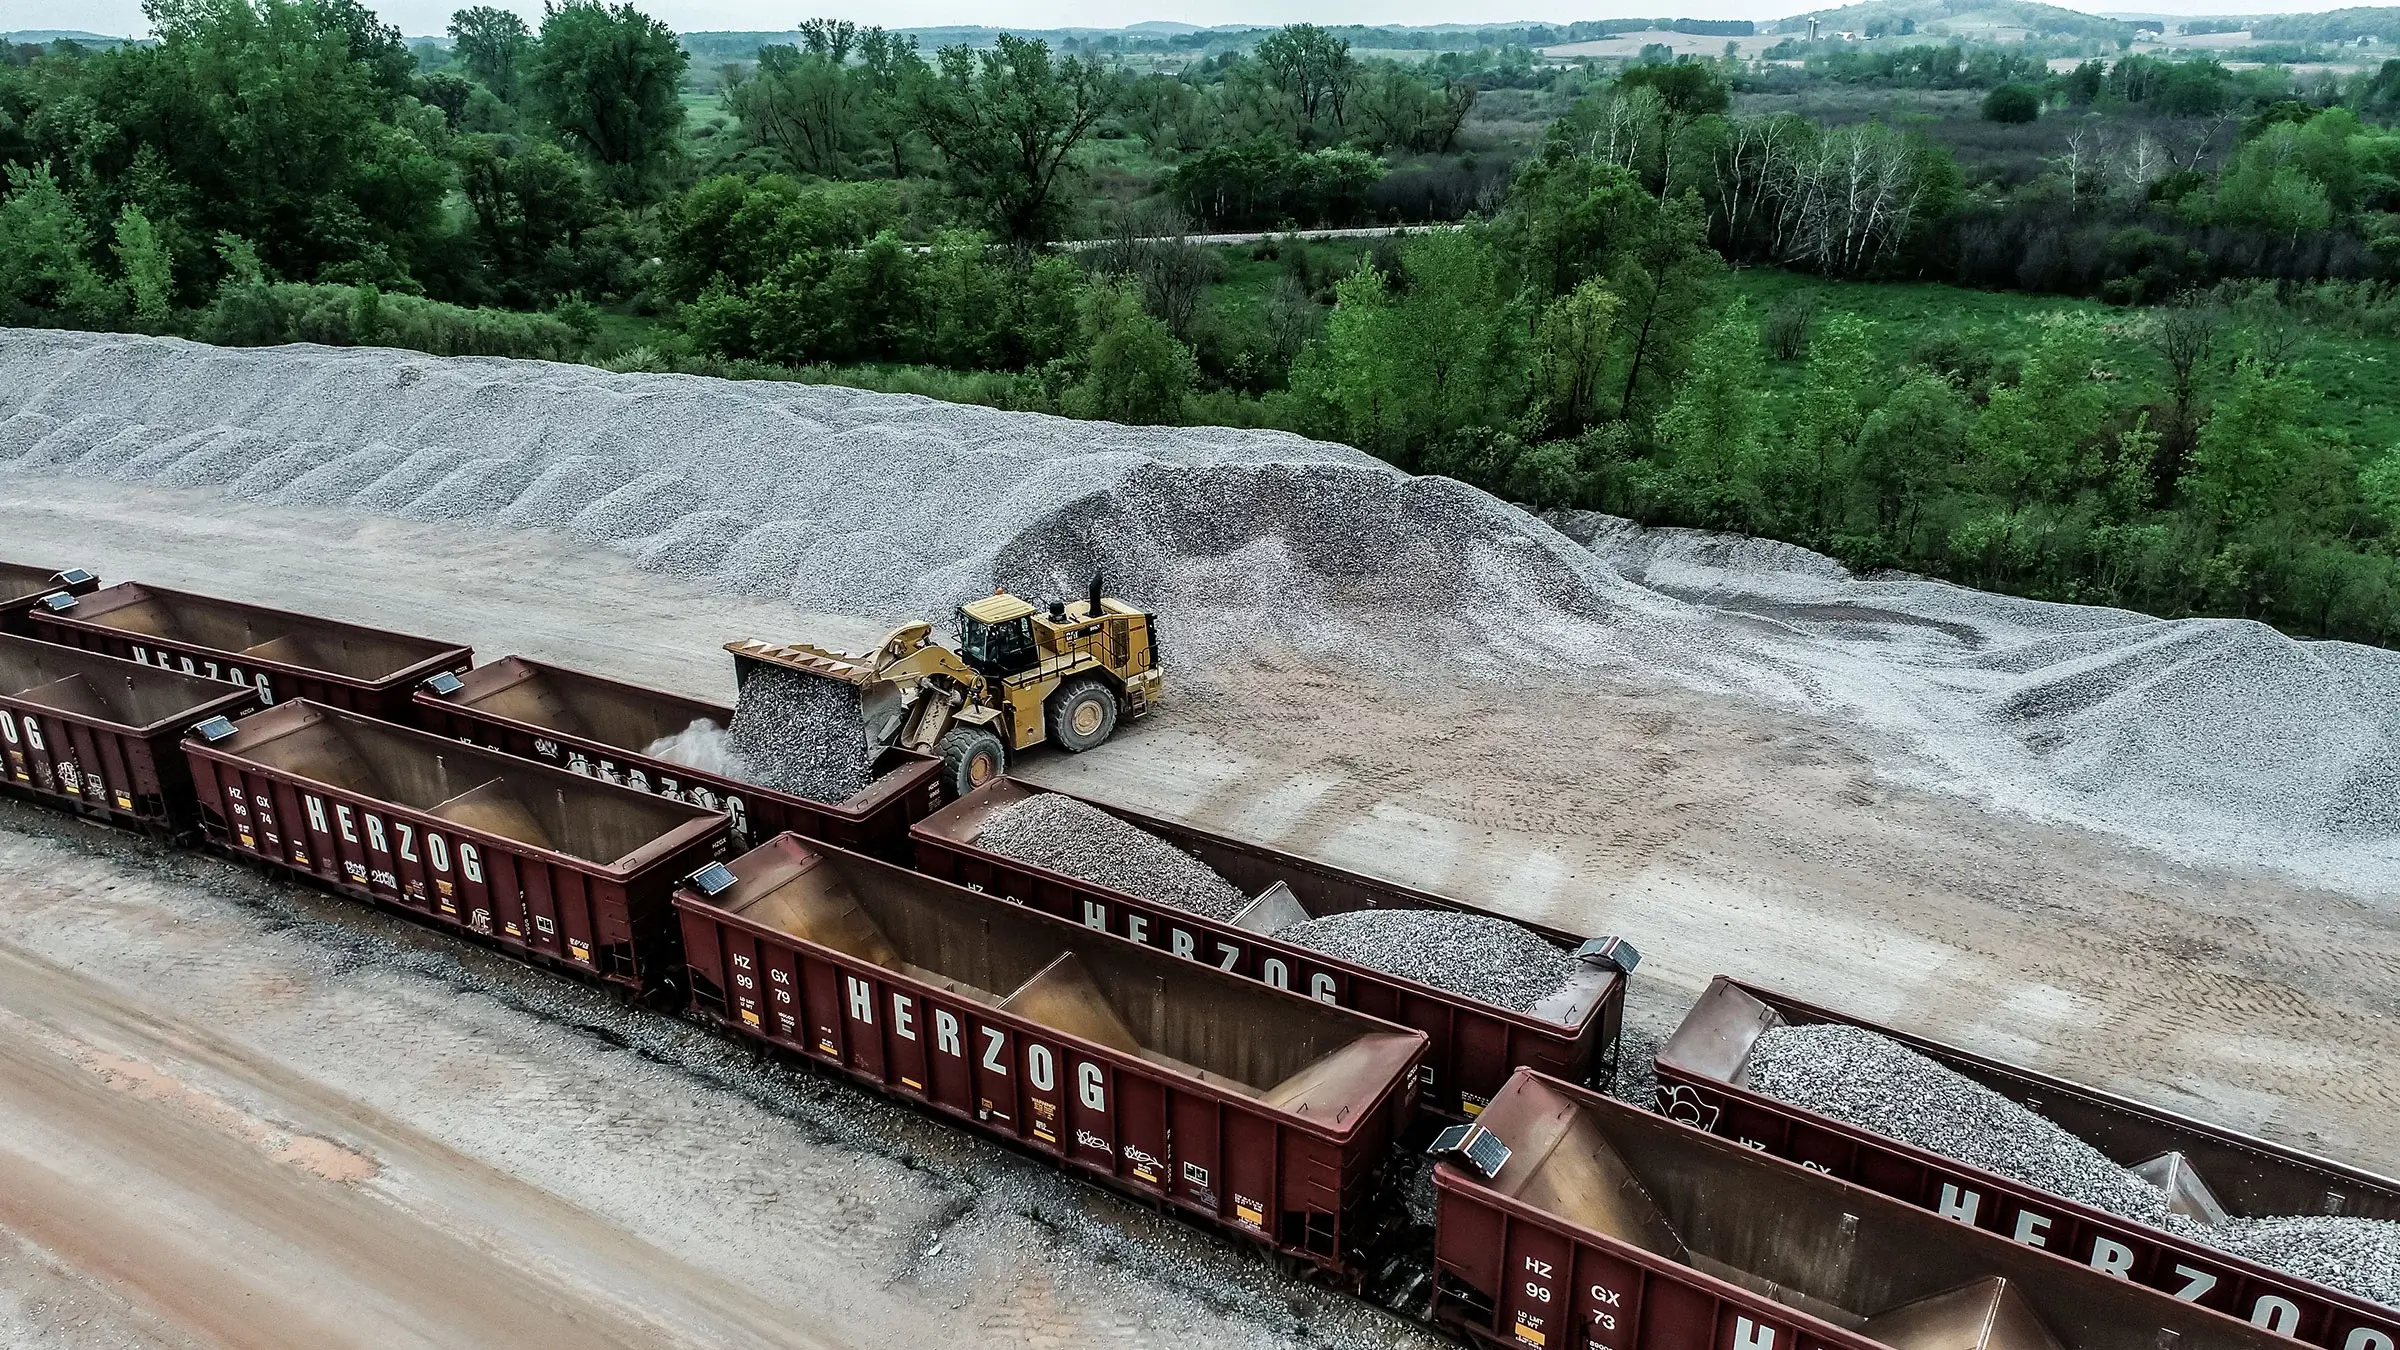 A backhoe unloads ballast stone into rail containers